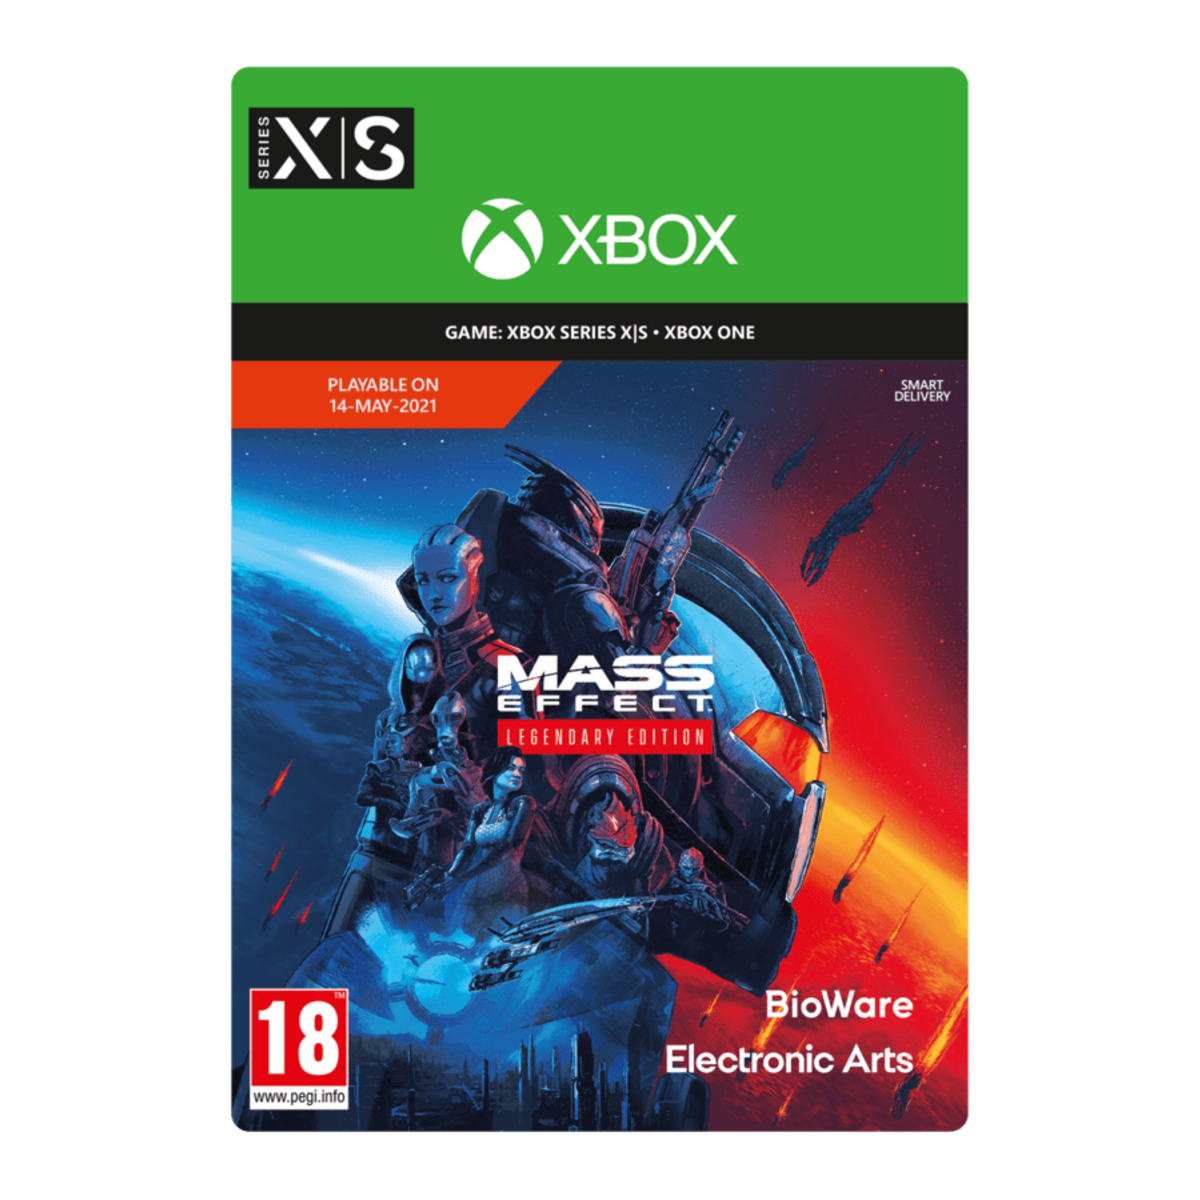 is giving away over 30 games, including Mass Effect